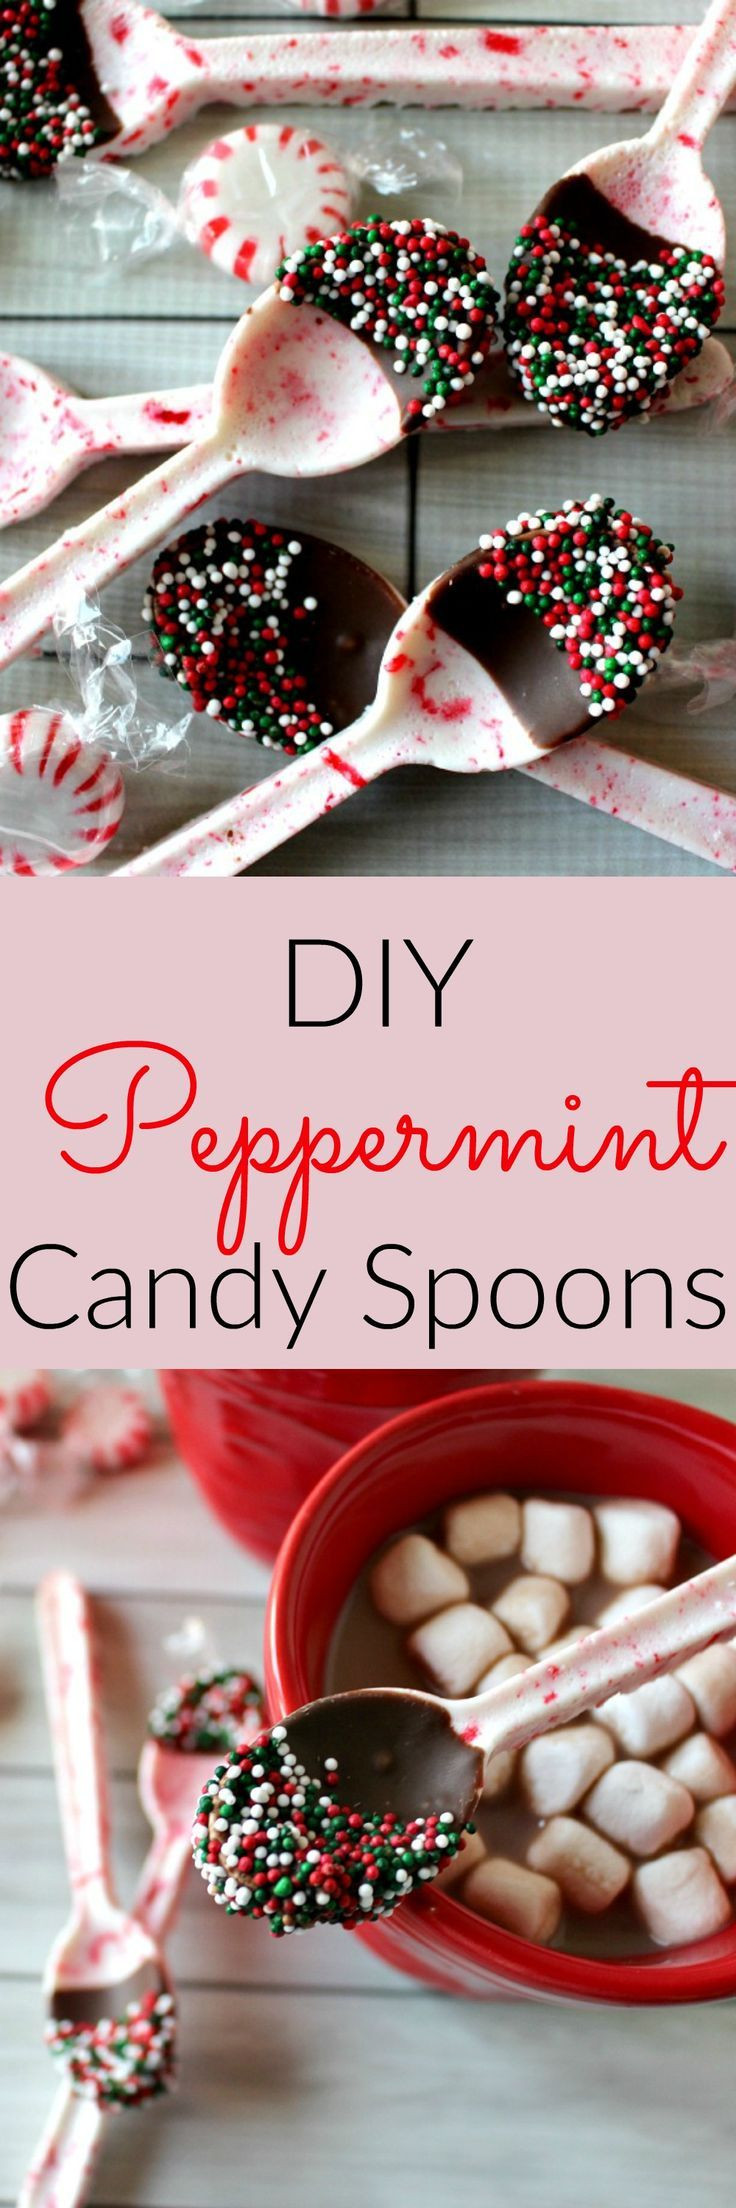 Christmas Candy Recipes For Gifts
 25 best Peppermint Candy ideas on Pinterest